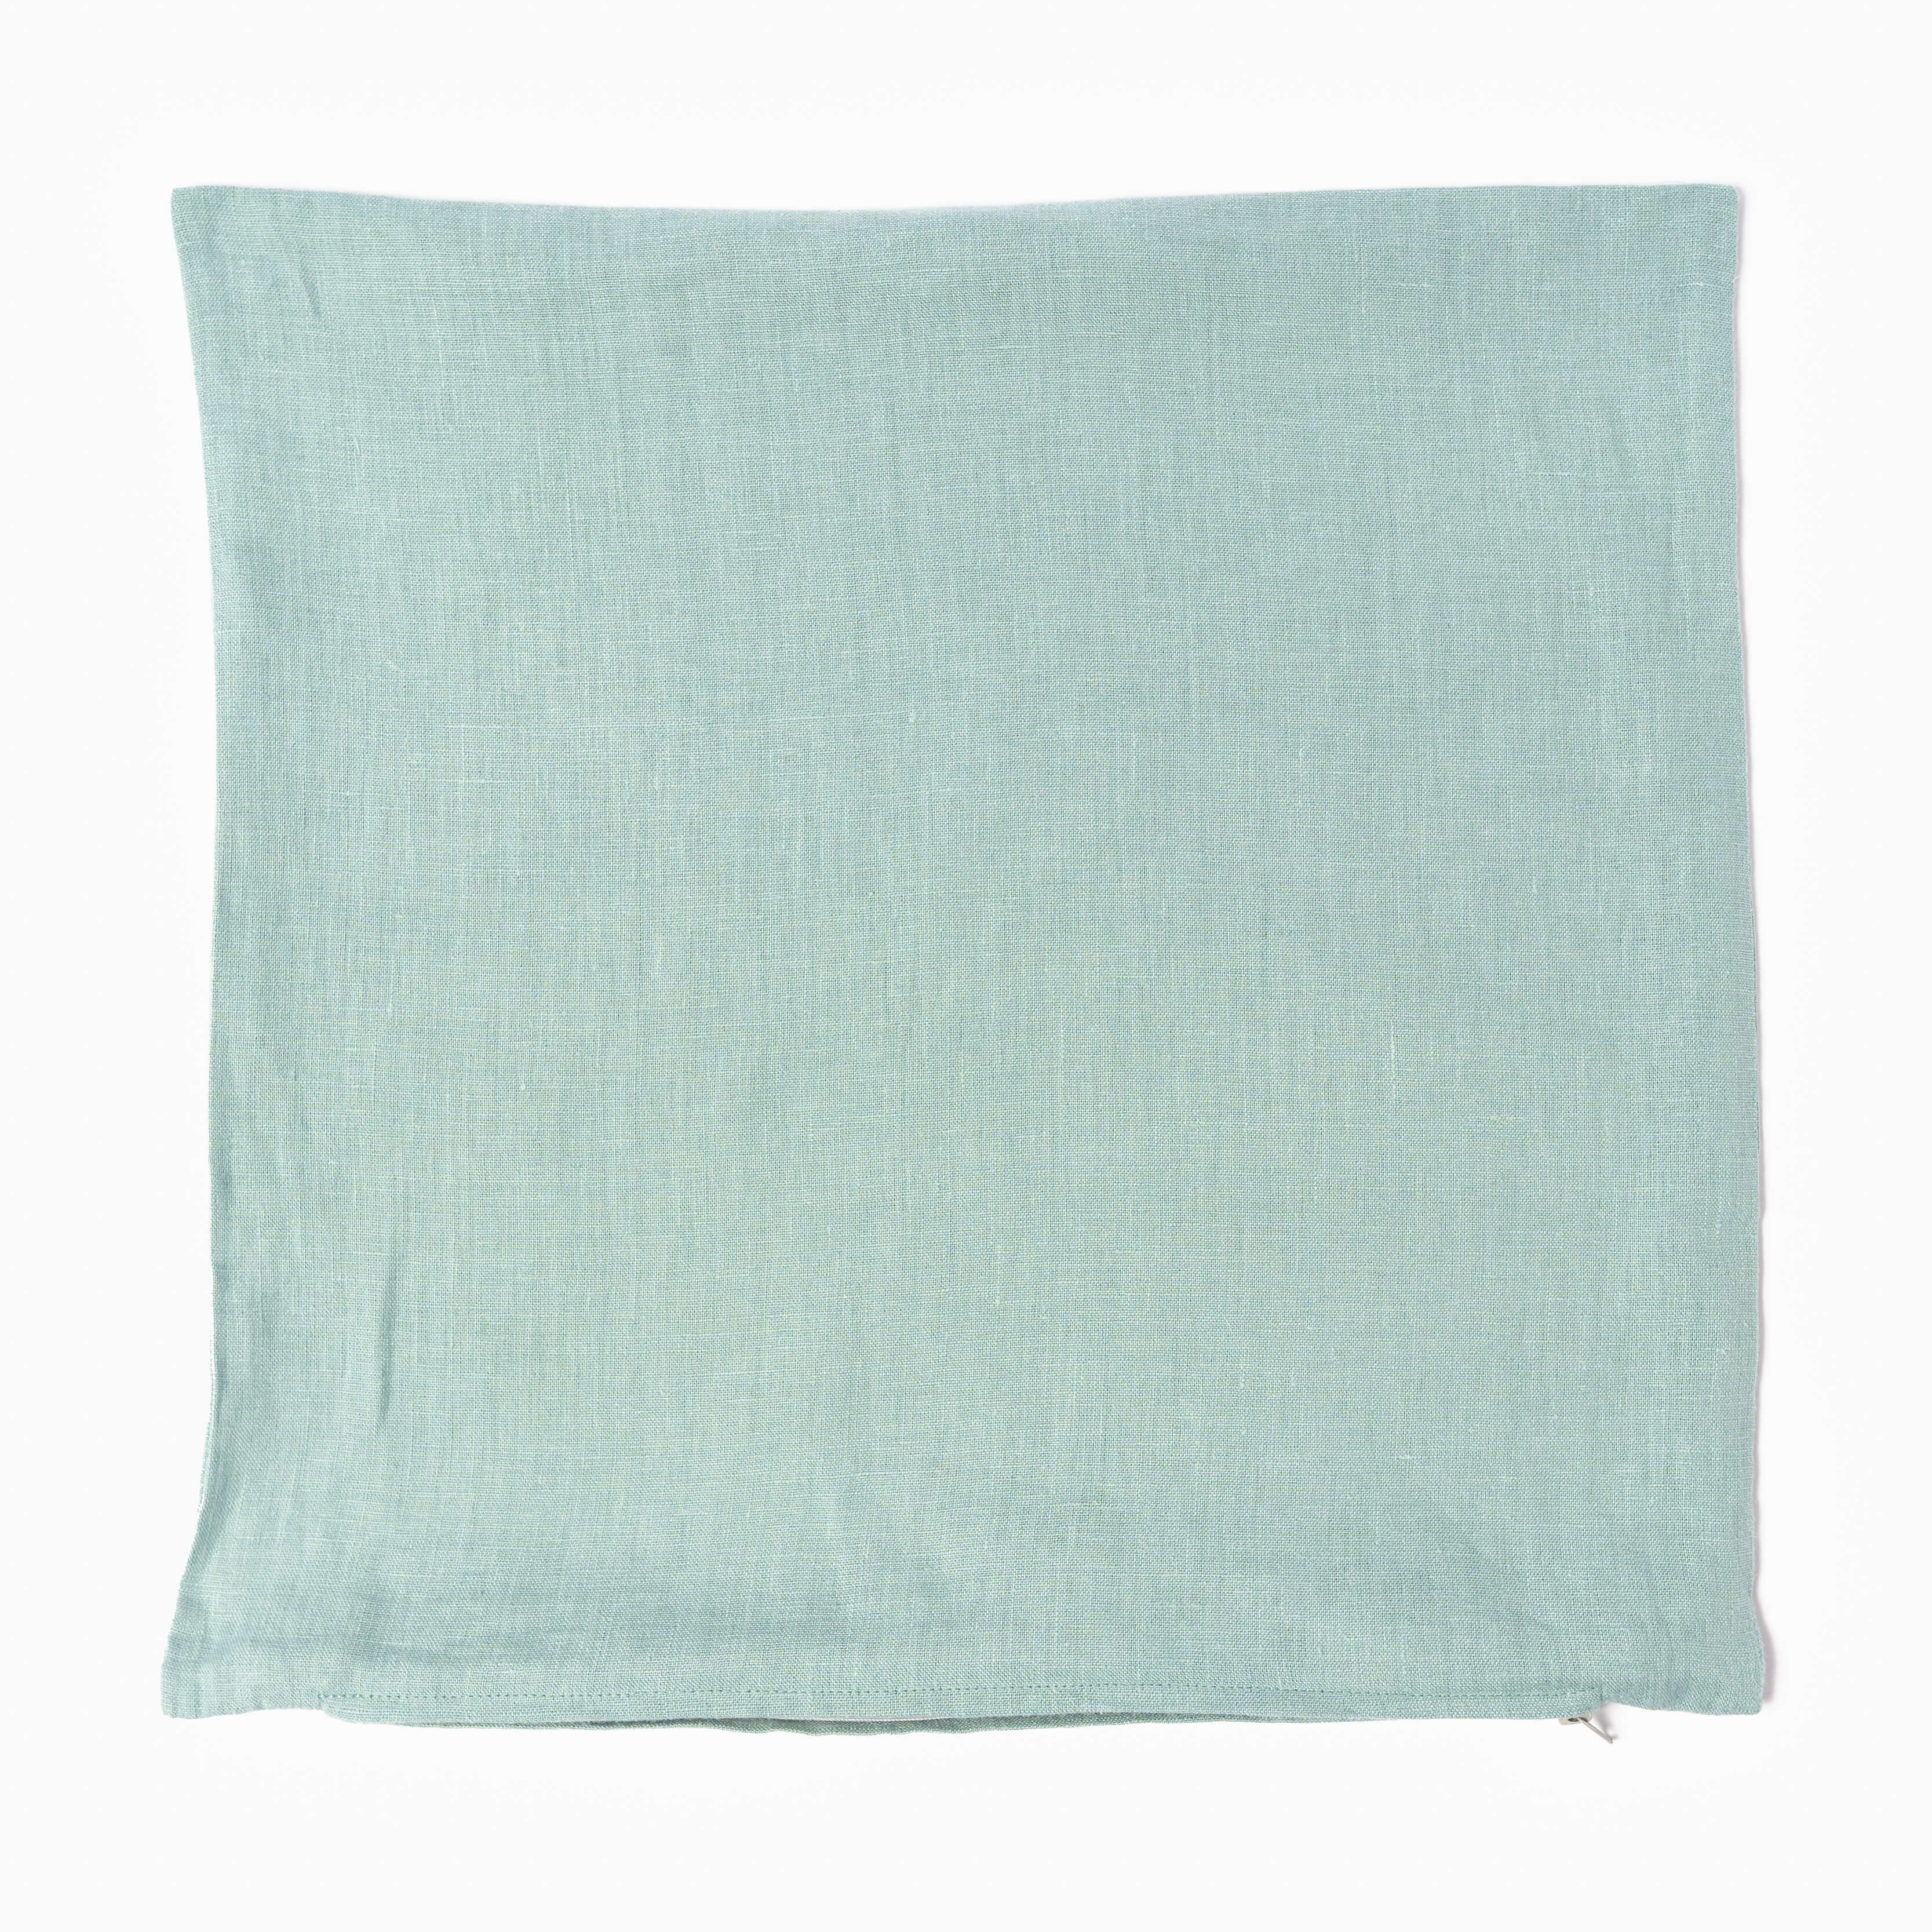 Dusty turquoise linen cushion cover without insert on white background